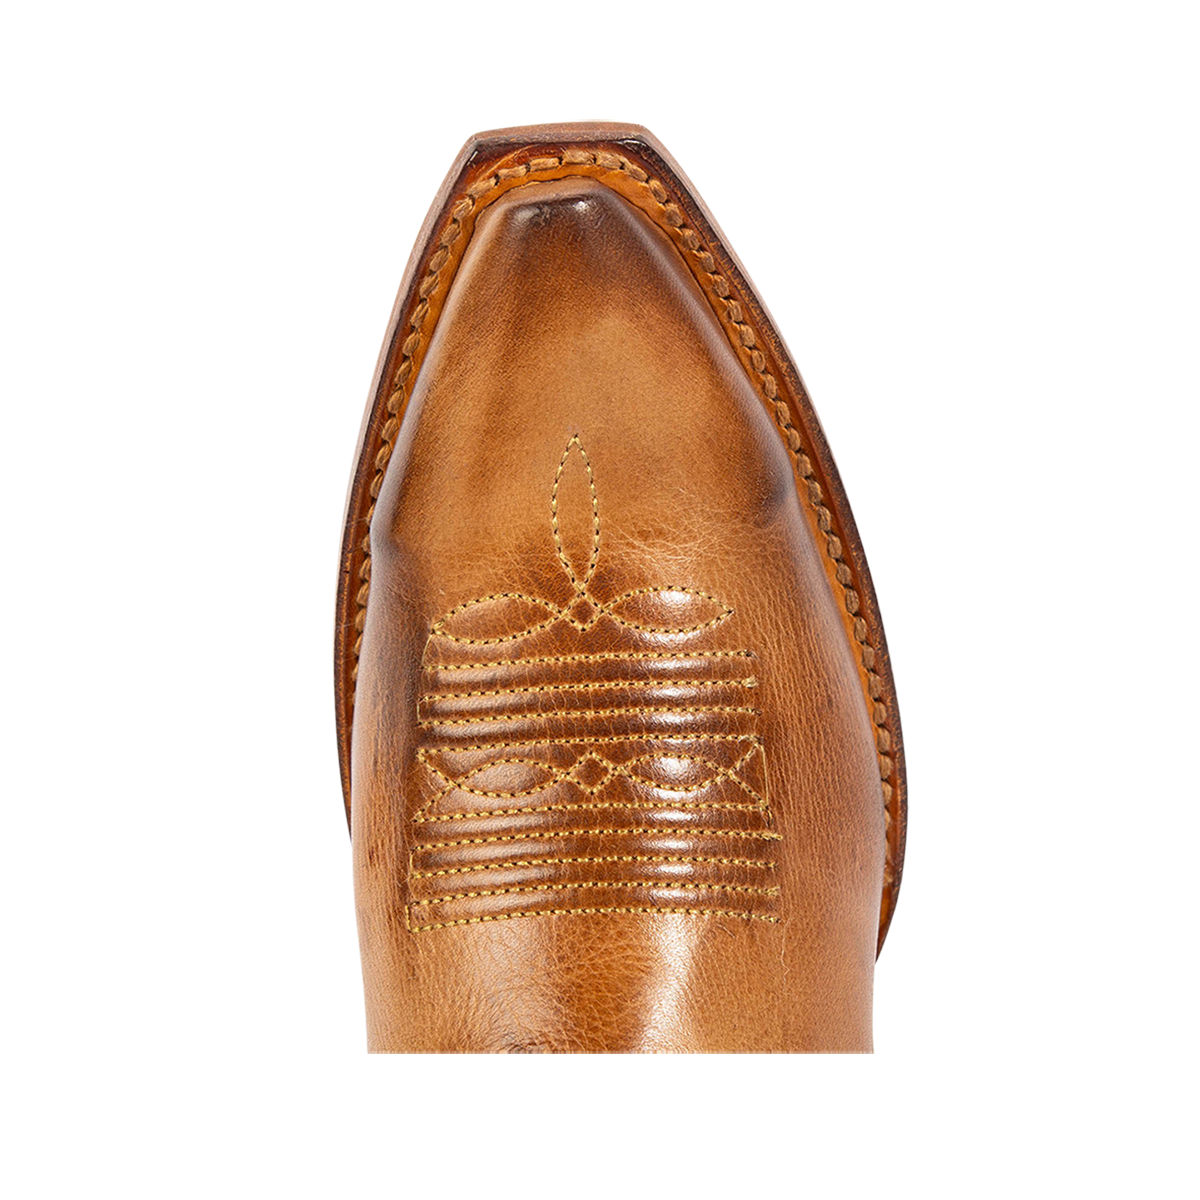 Top view showing FREEBIRD women's Woody wheat leather boot with stitch detailing and snip toe construction